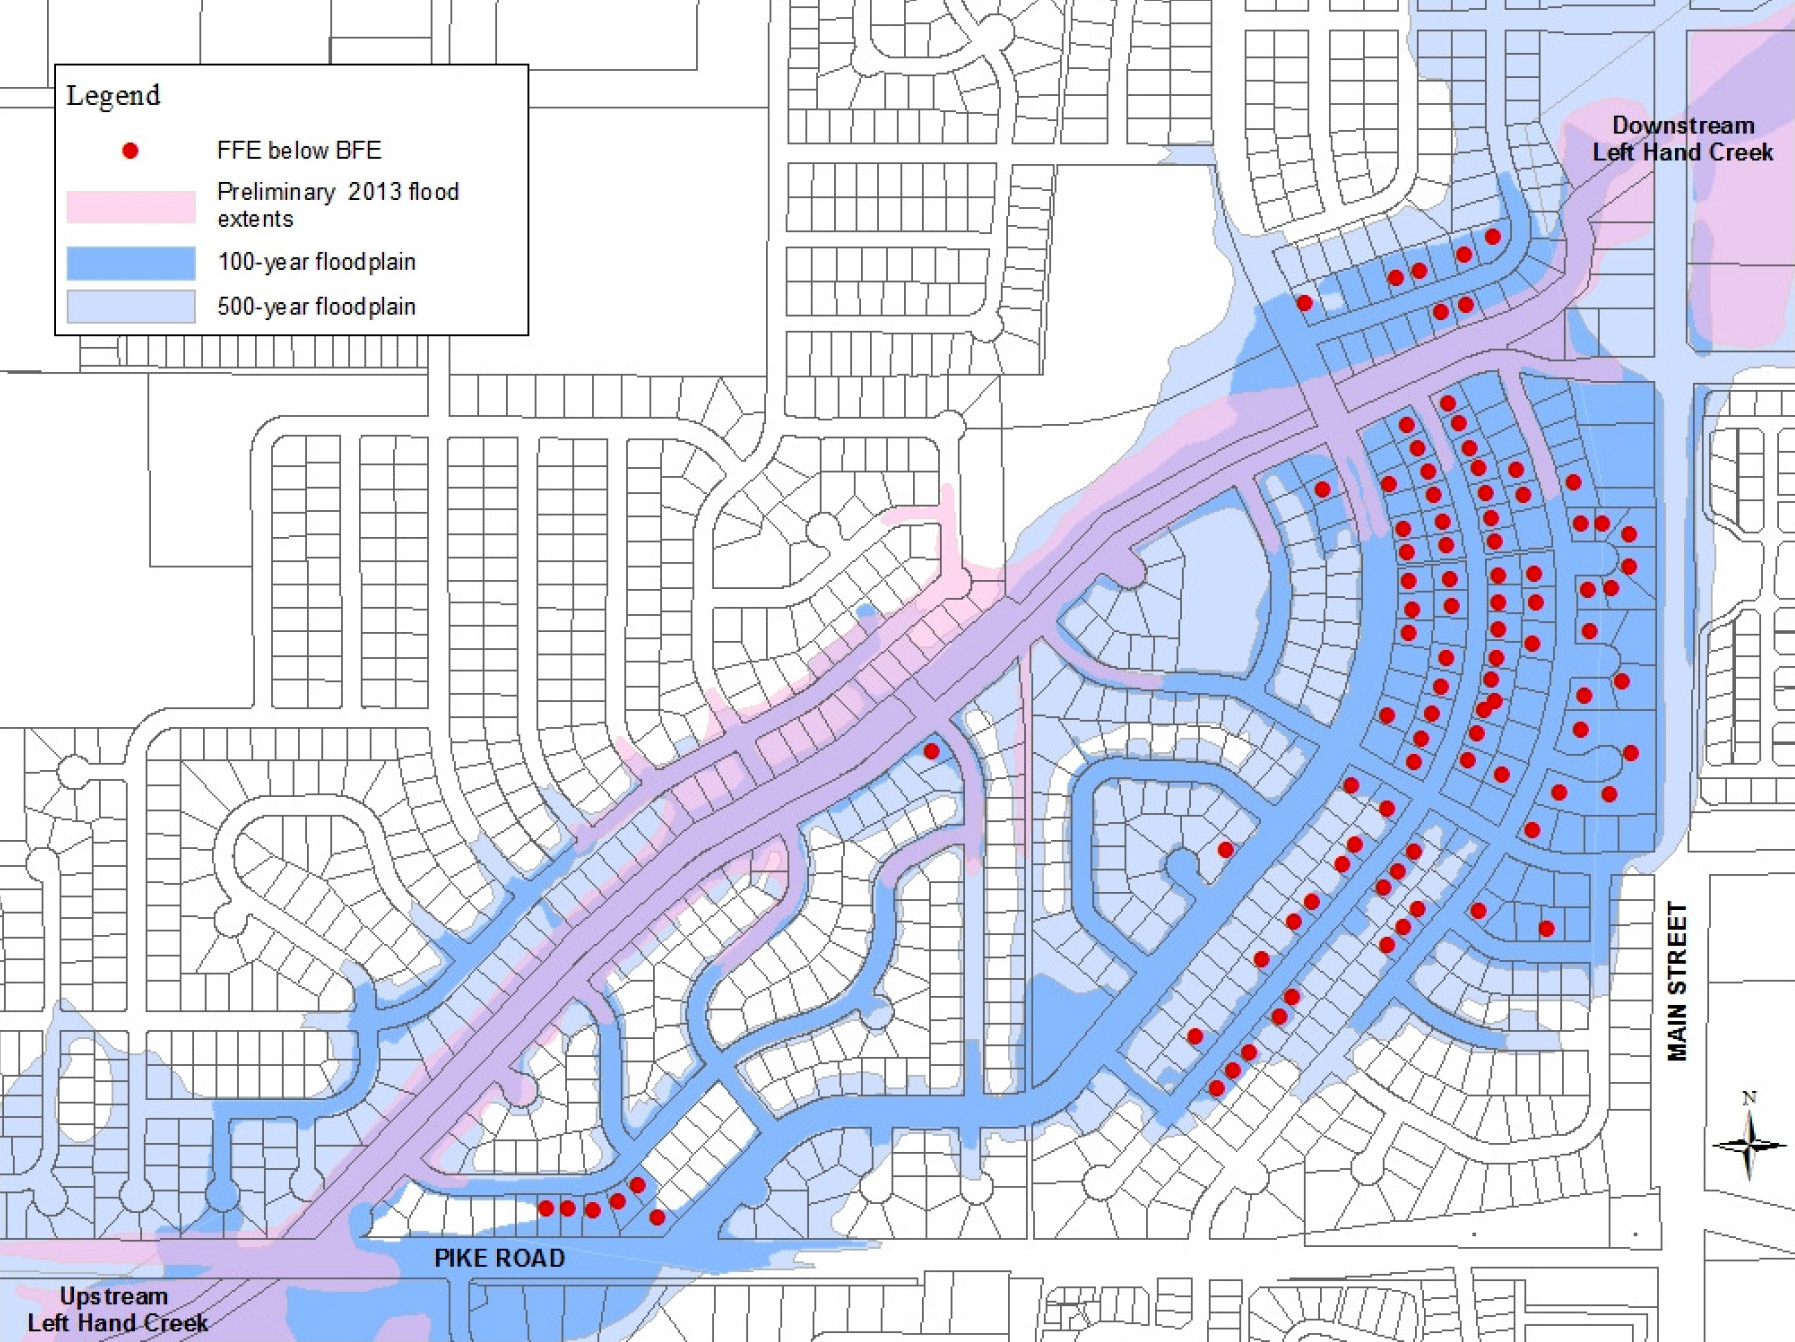 Structures to be removed from SFHA in Left Hand Creek Flood Project proposal.  Shown: FFE below BFE; Preliminary 2013 flood extents; 100-year floodplain; 500-year floodplain.